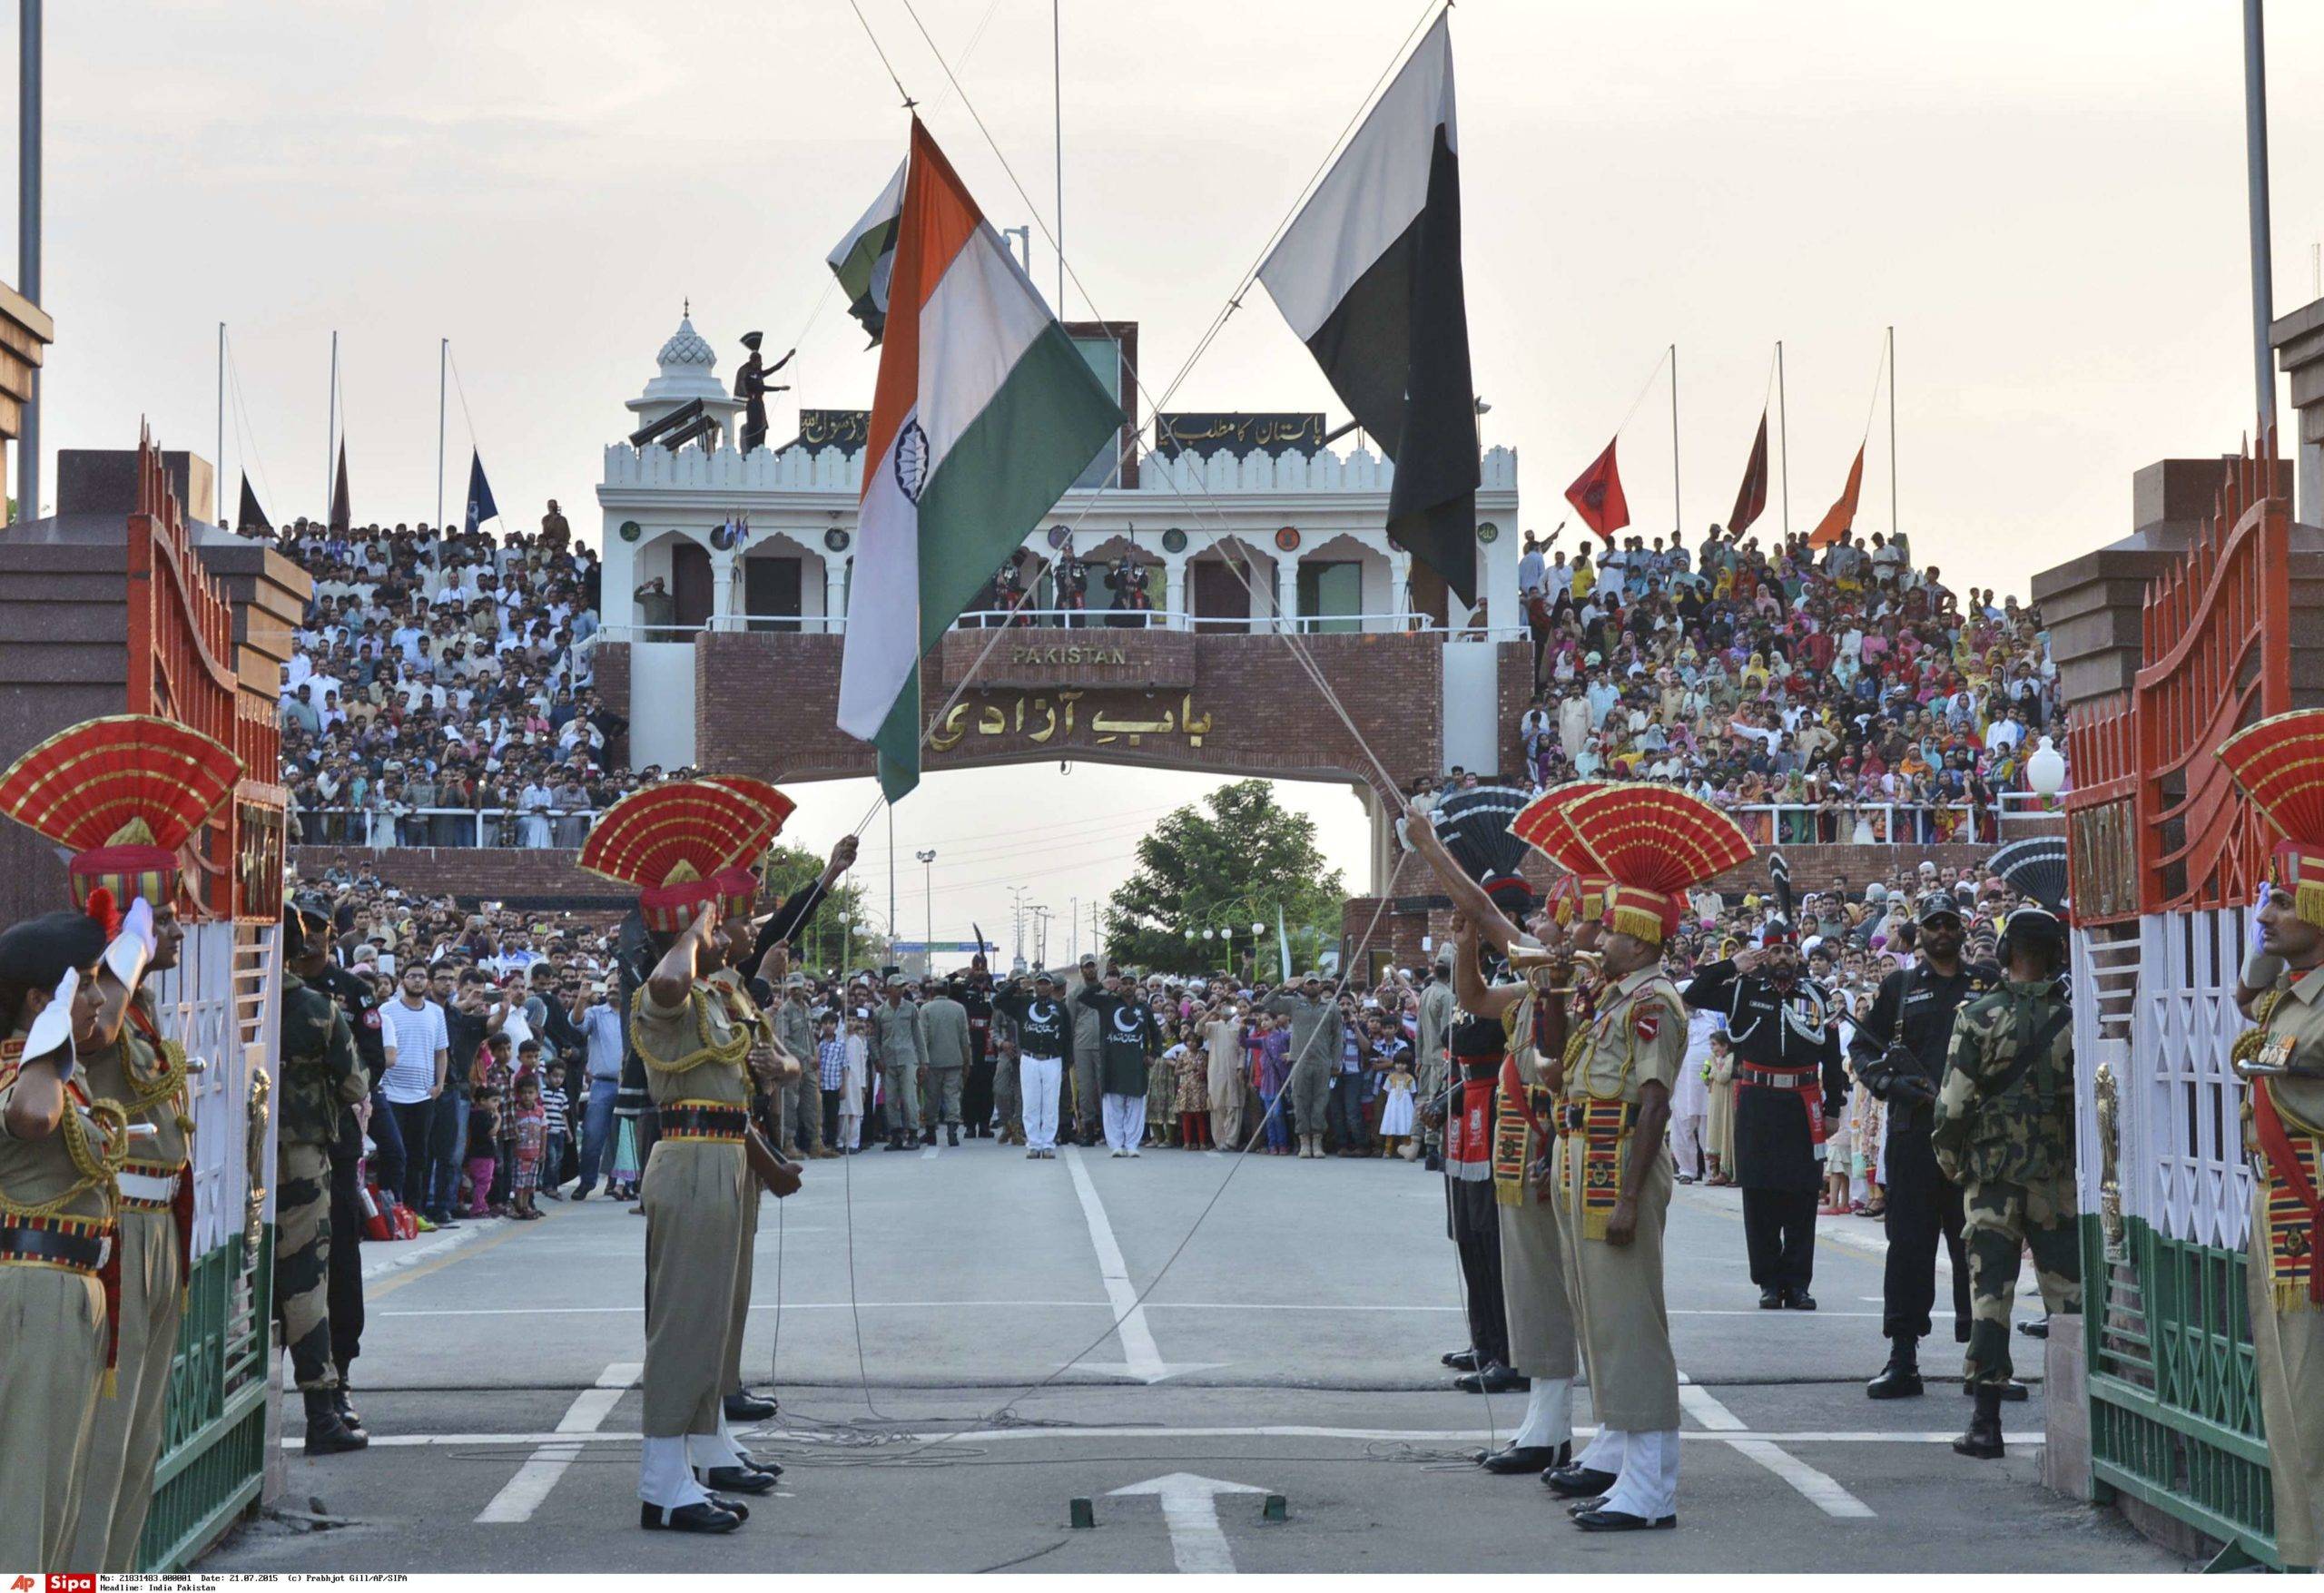 FILE-In this July 21, 2015 file photo, Indian and Pakistani flags are lowered during a daily retreat ceremony at the India-Pakistan joint border check post of Attari-Wagah near Amritsar, India.The top security officials from India and Pakistan held bilateral talks in Thailand's capital on Sunday, signaling a resumption of the rival countries' on-again, off-again peace dialogue.(AP Photo/Prabhjot Gill, file) EDITORIAL USE ONLY/RSI160/175240439390/July 21, 2015 file photo EDITORIAL USE ONLY/1512061522